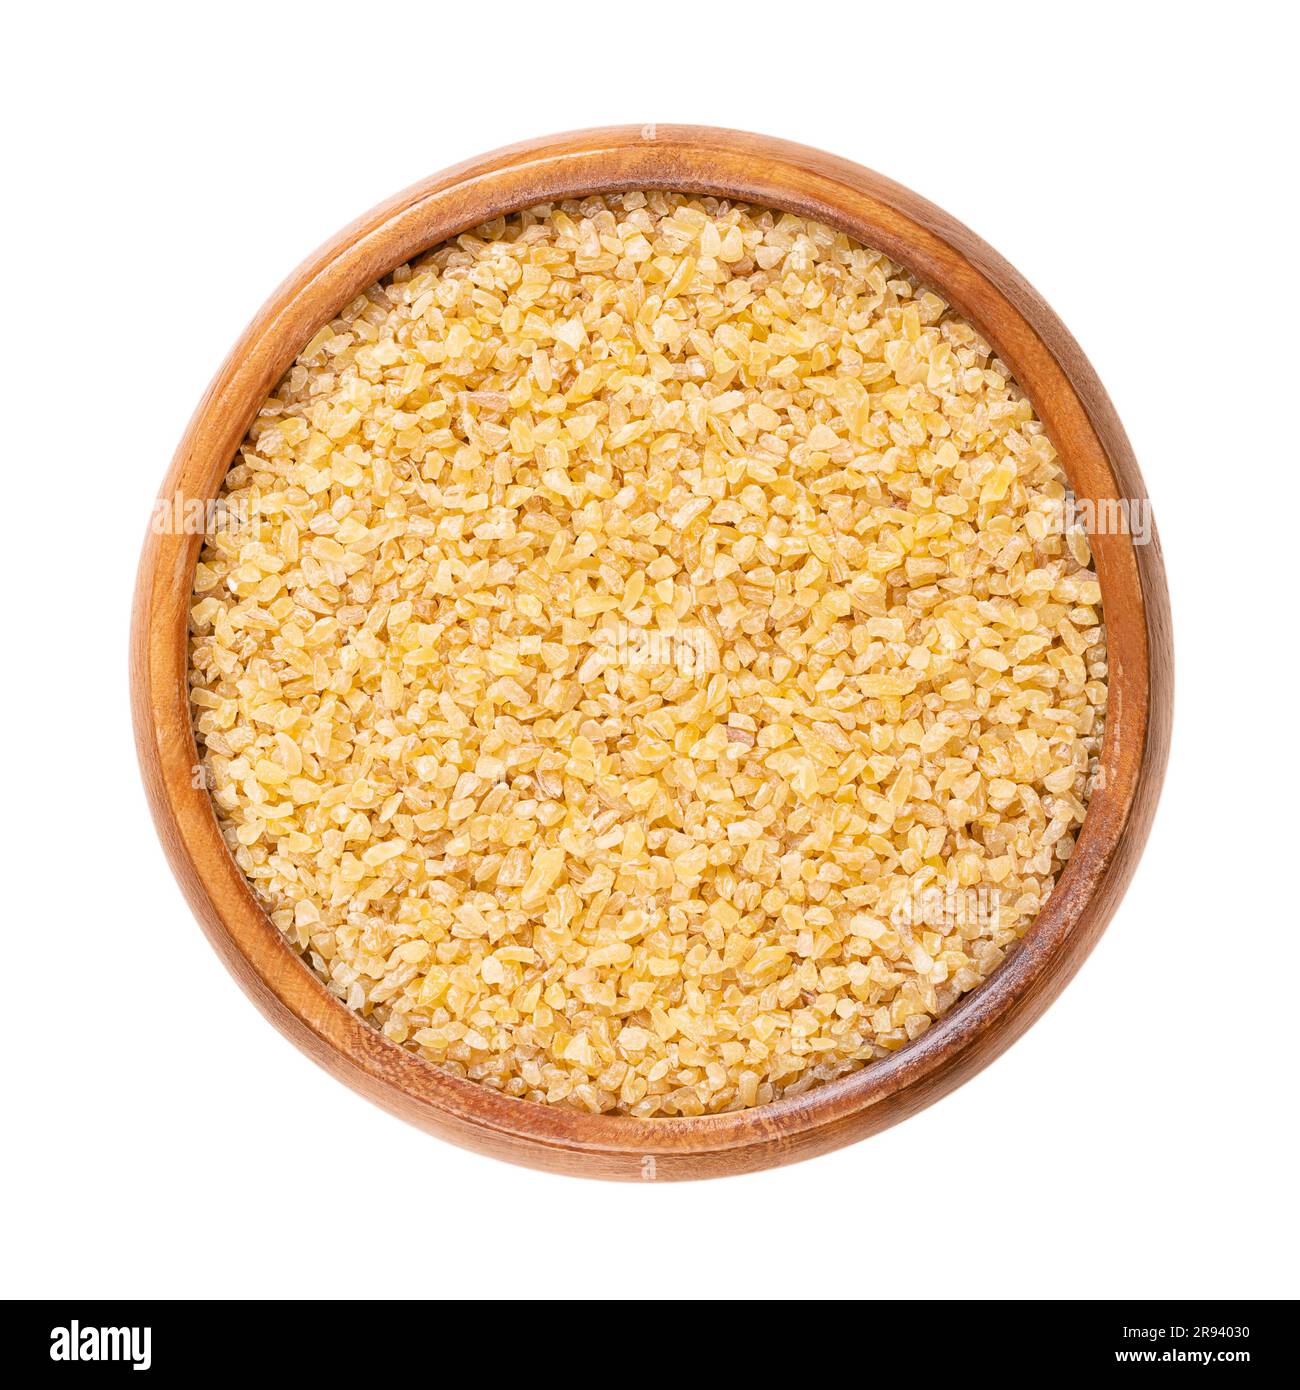 Coarse bulgur, also called burghul, in a wooden bowl. Cracked and parboiled wheat foodstuff, and a common ingredient in many cuisines of West Asia. Stock Photo